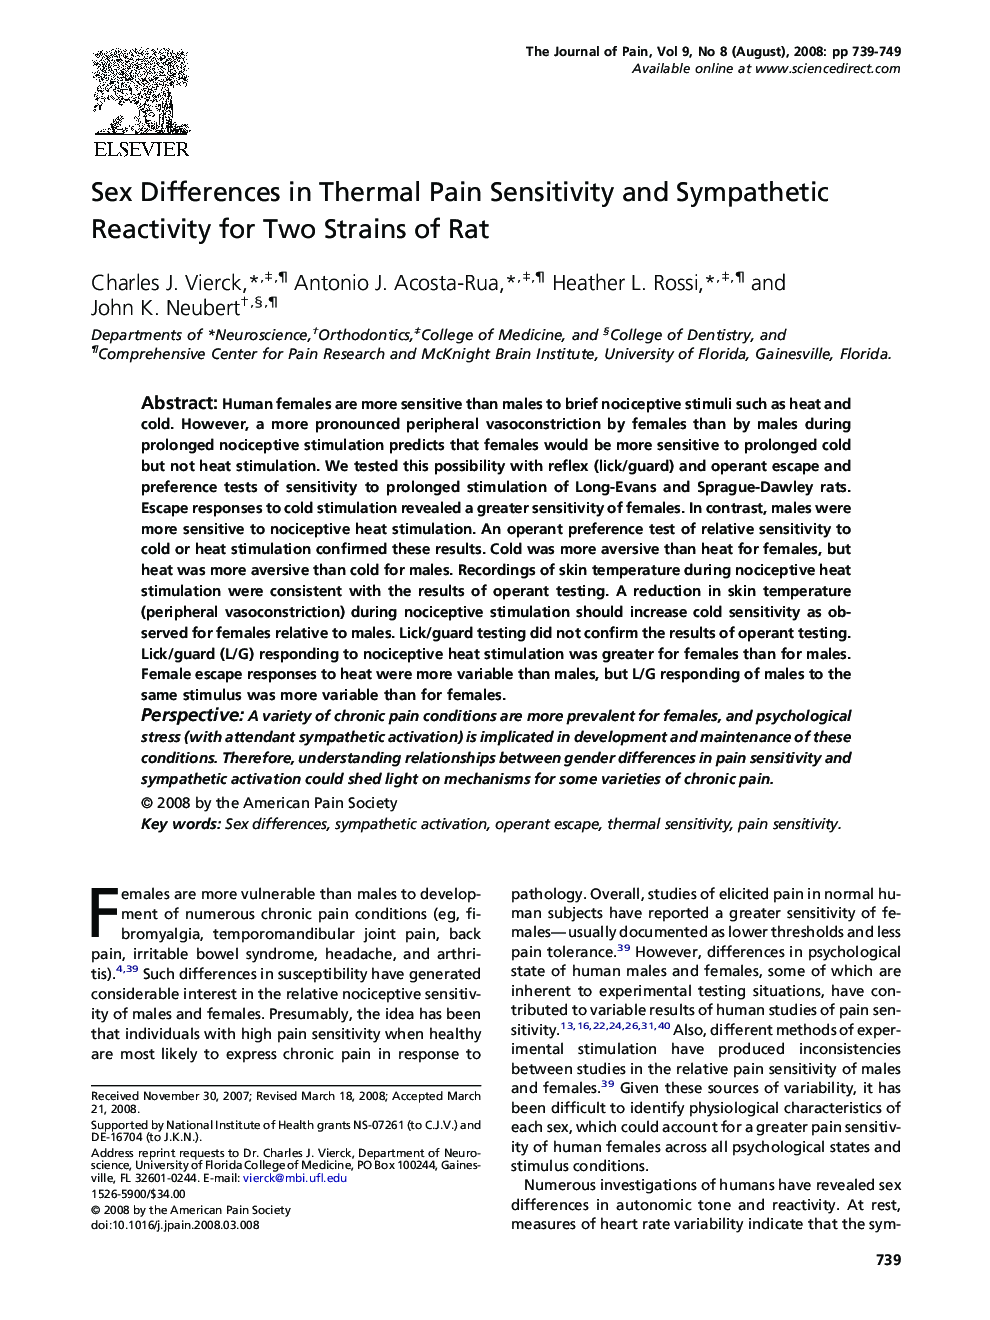 Sex Differences in Thermal Pain Sensitivity and Sympathetic Reactivity for Two Strains of Rat 